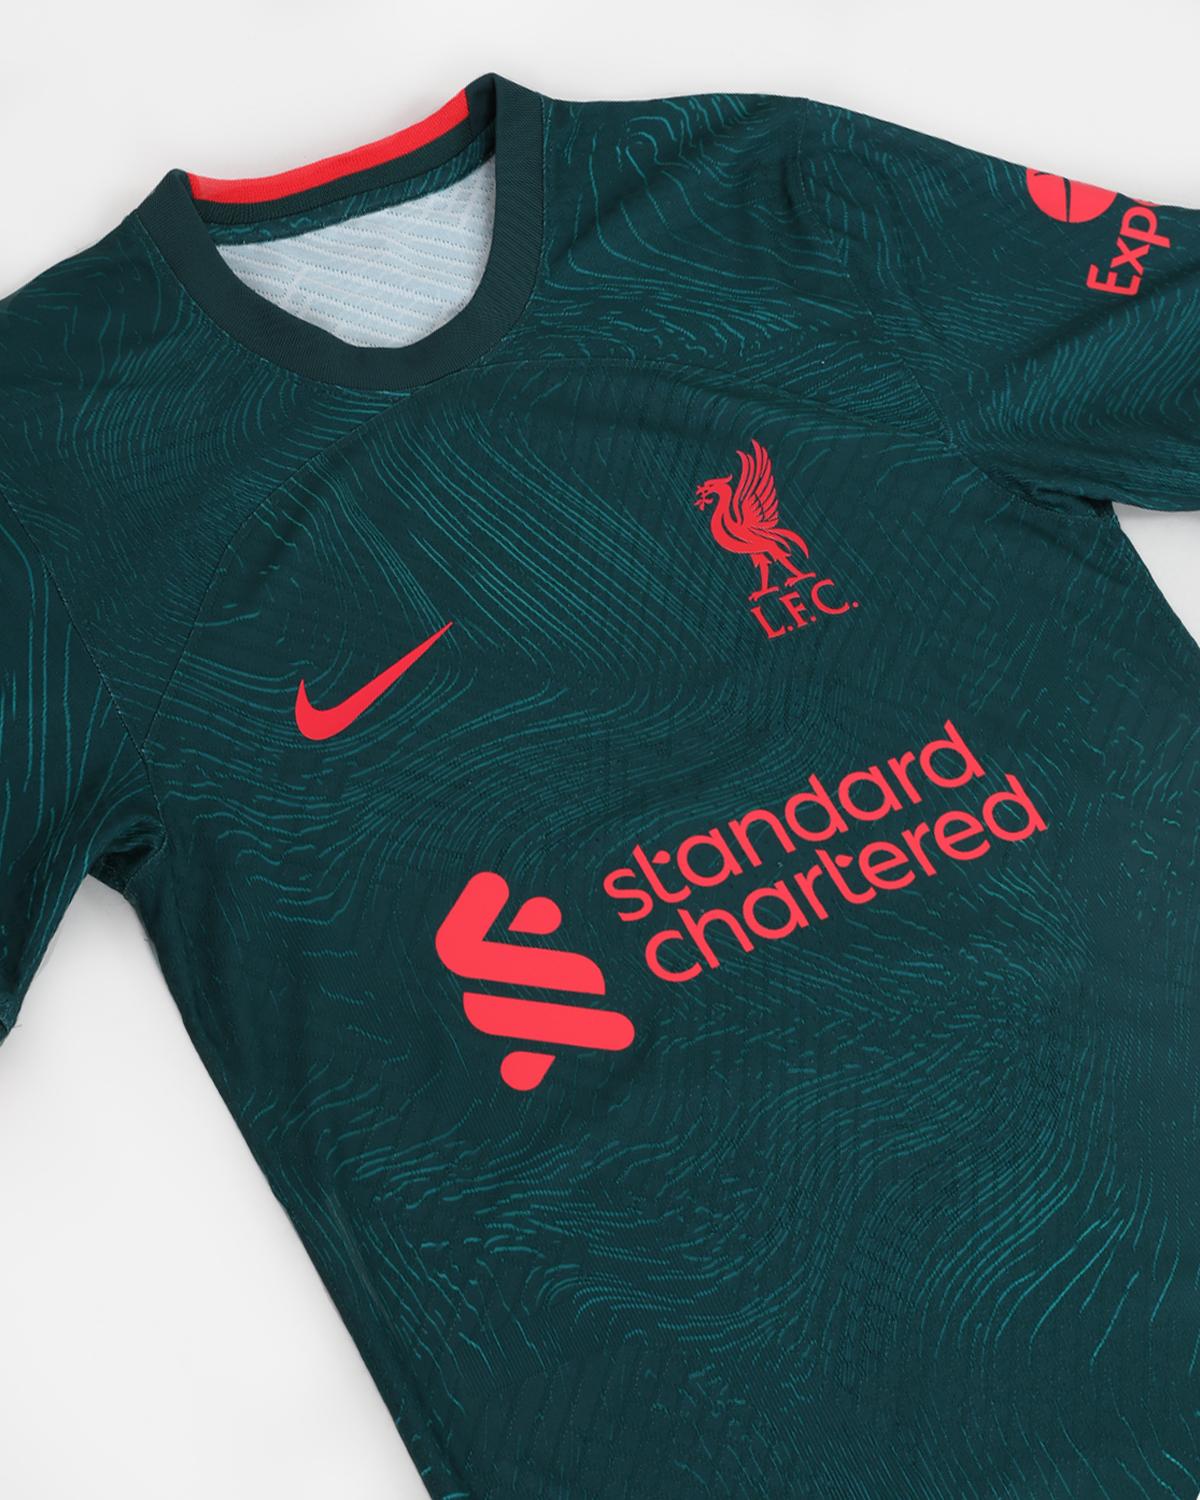 Why Liverpool's new Nike third kit looks so different for fans and